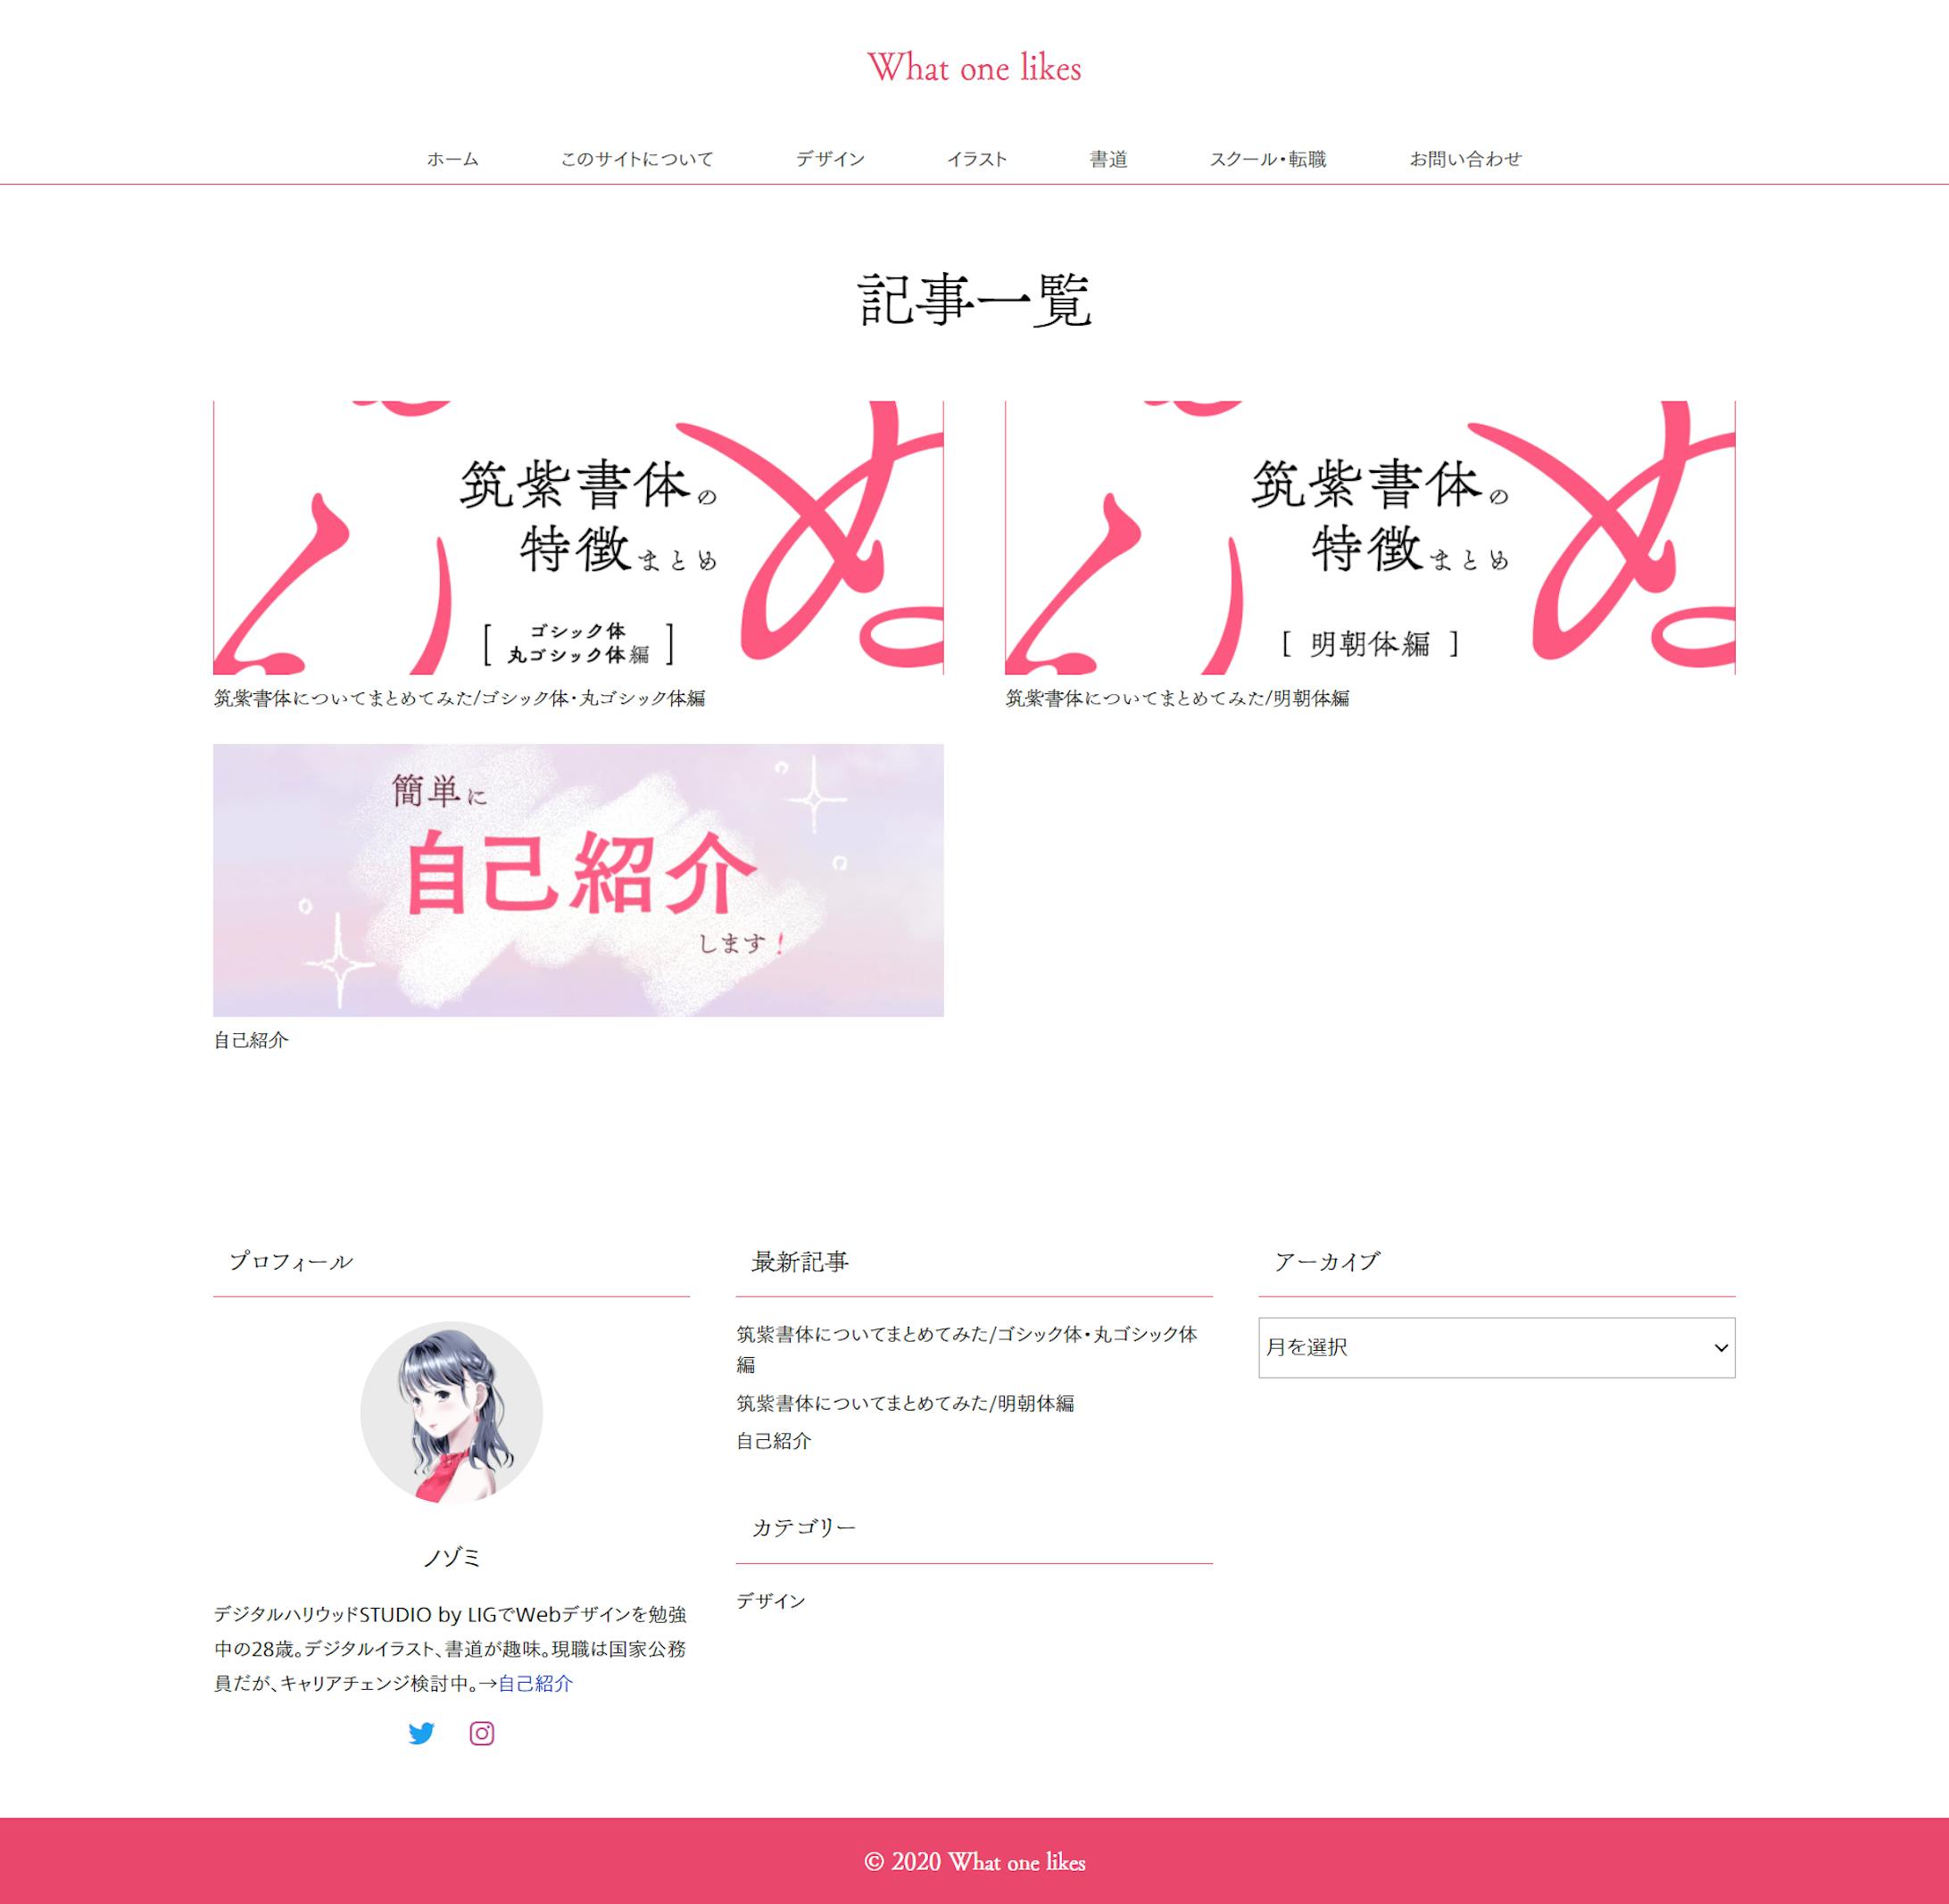 「What one likes」ブログサイト-2